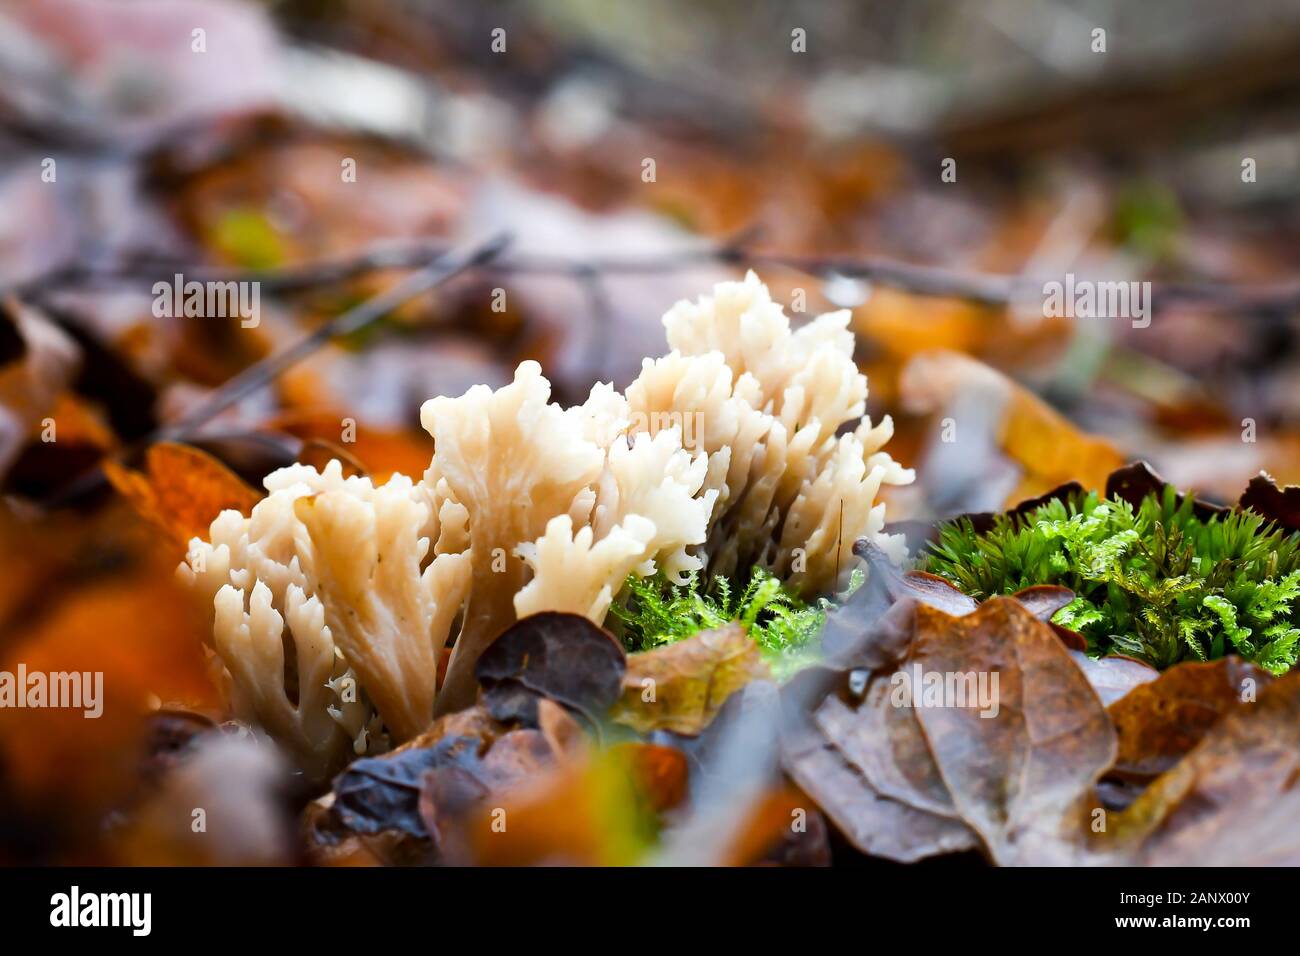 coral fungi growing on a leafy woodland floor in early spring late winter Stock Photo